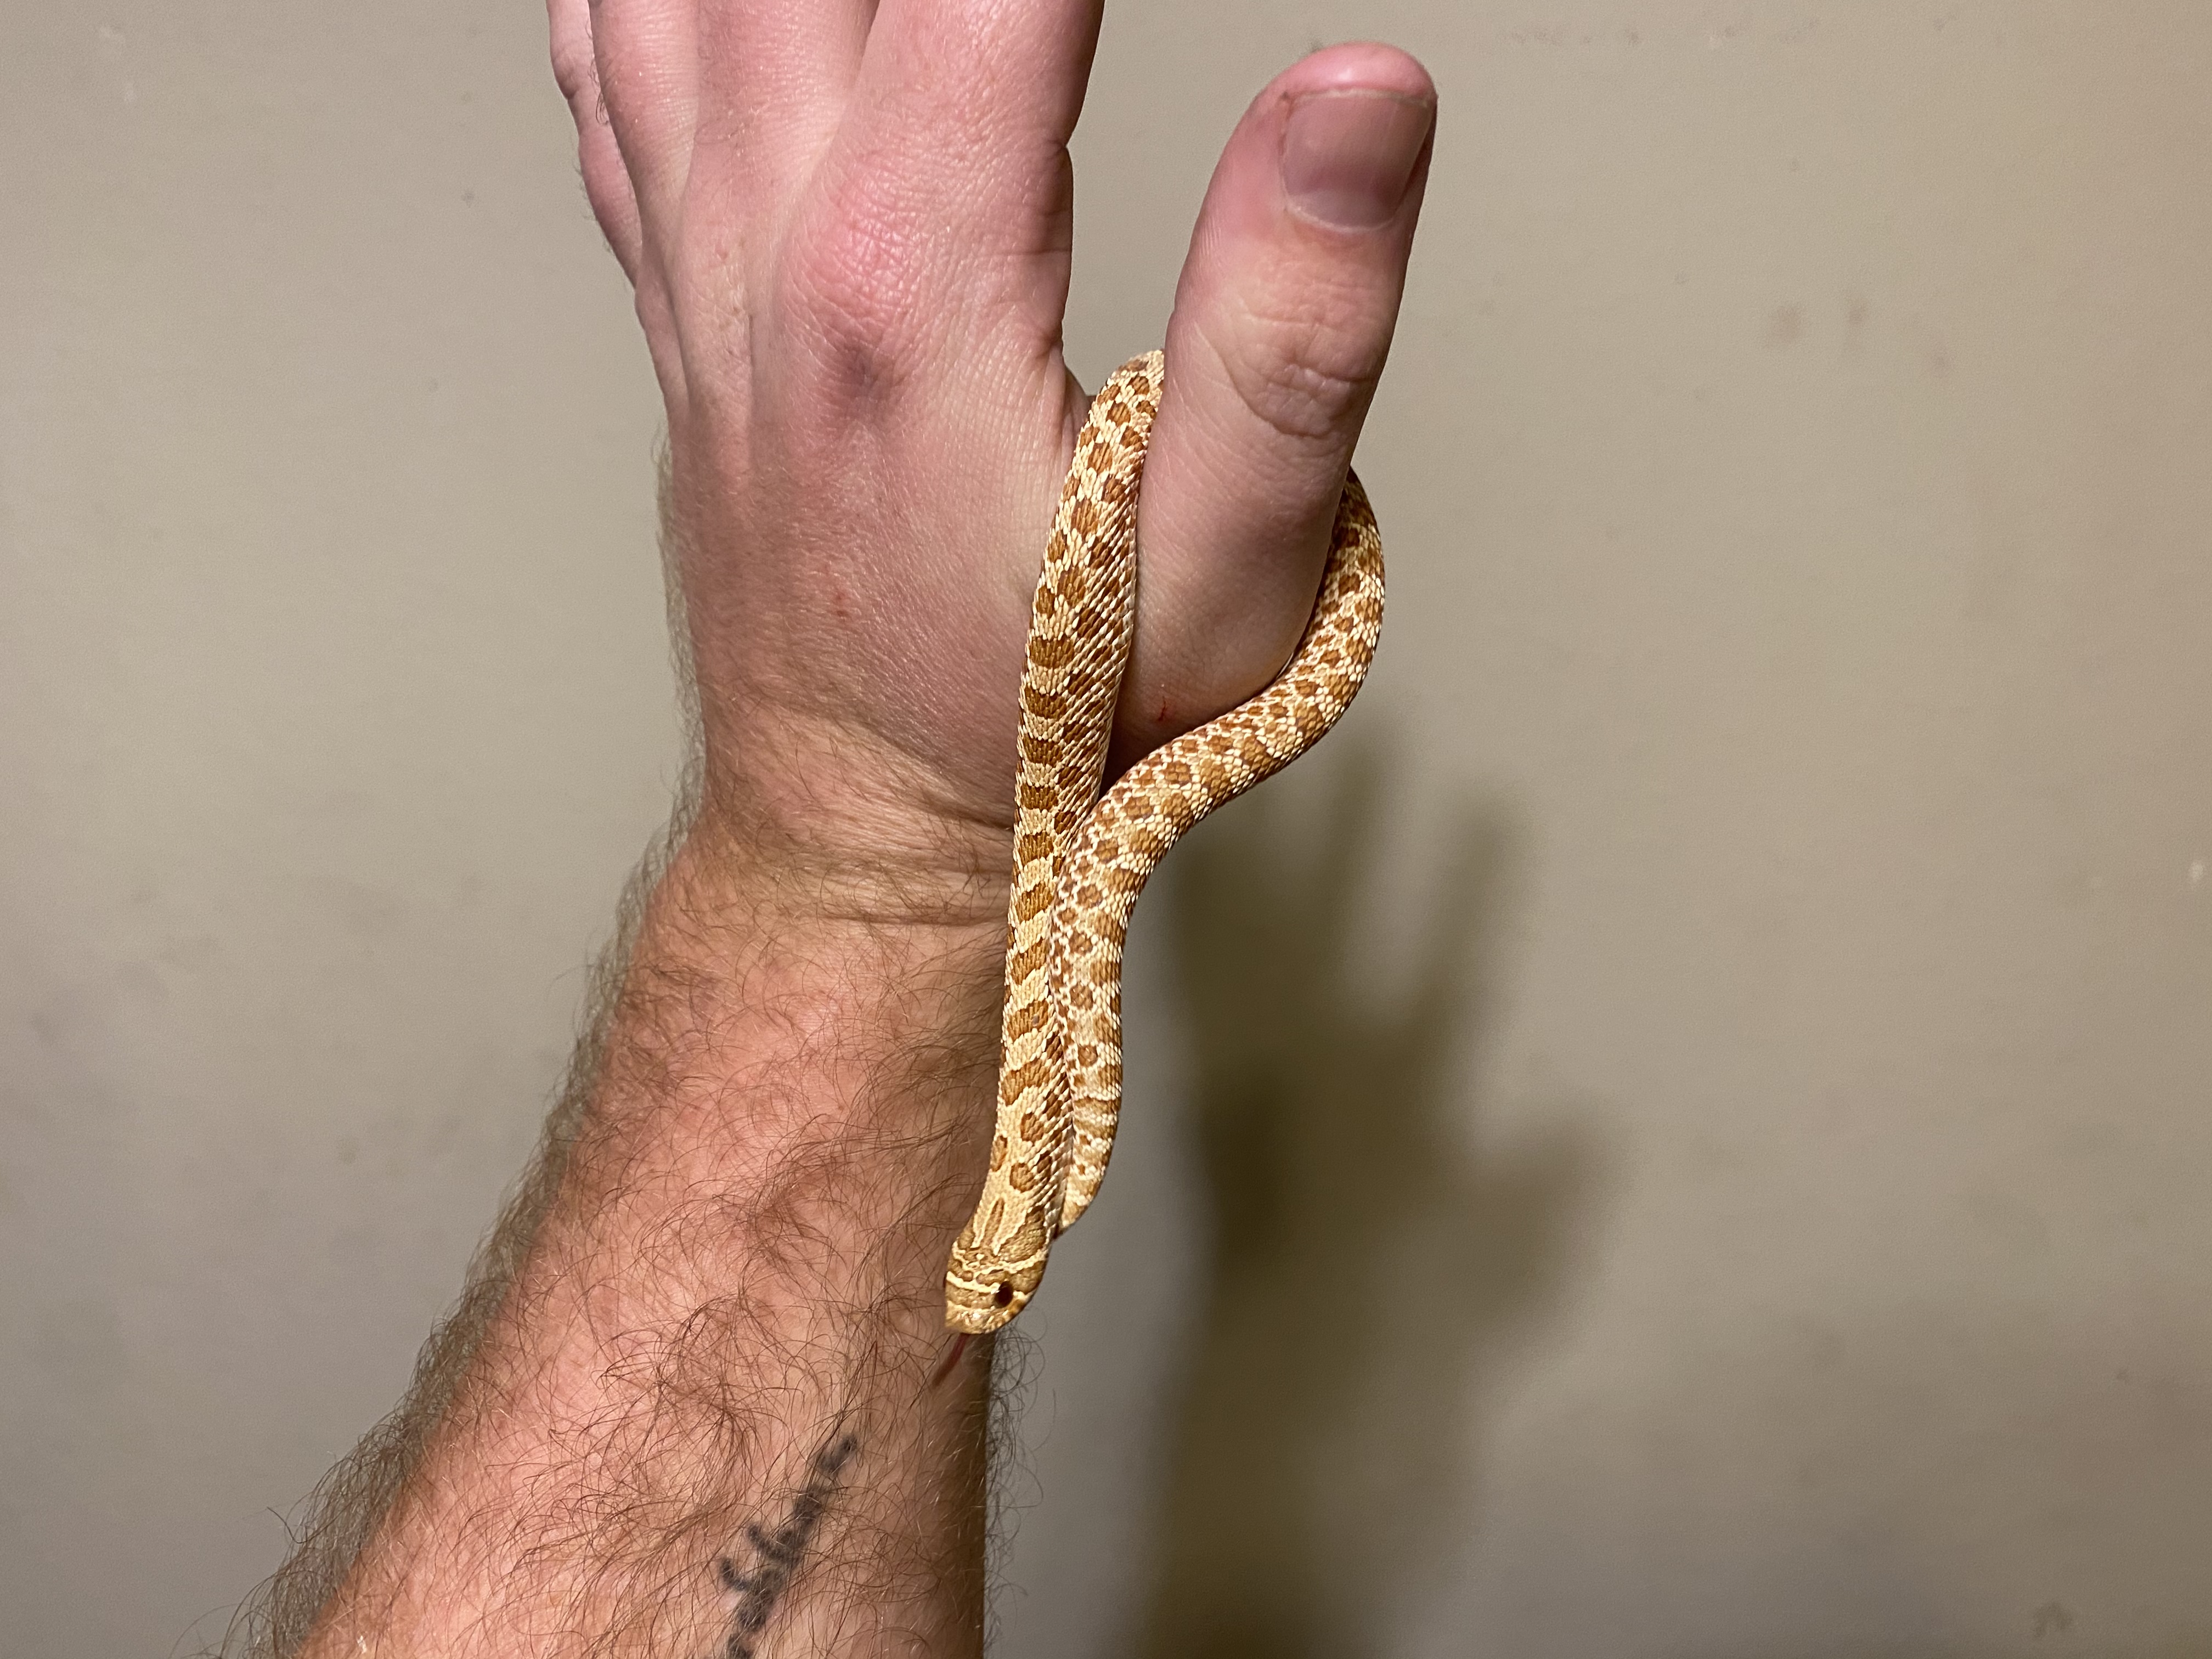 Evans Hypo Western Hognose by The Reptile Temple